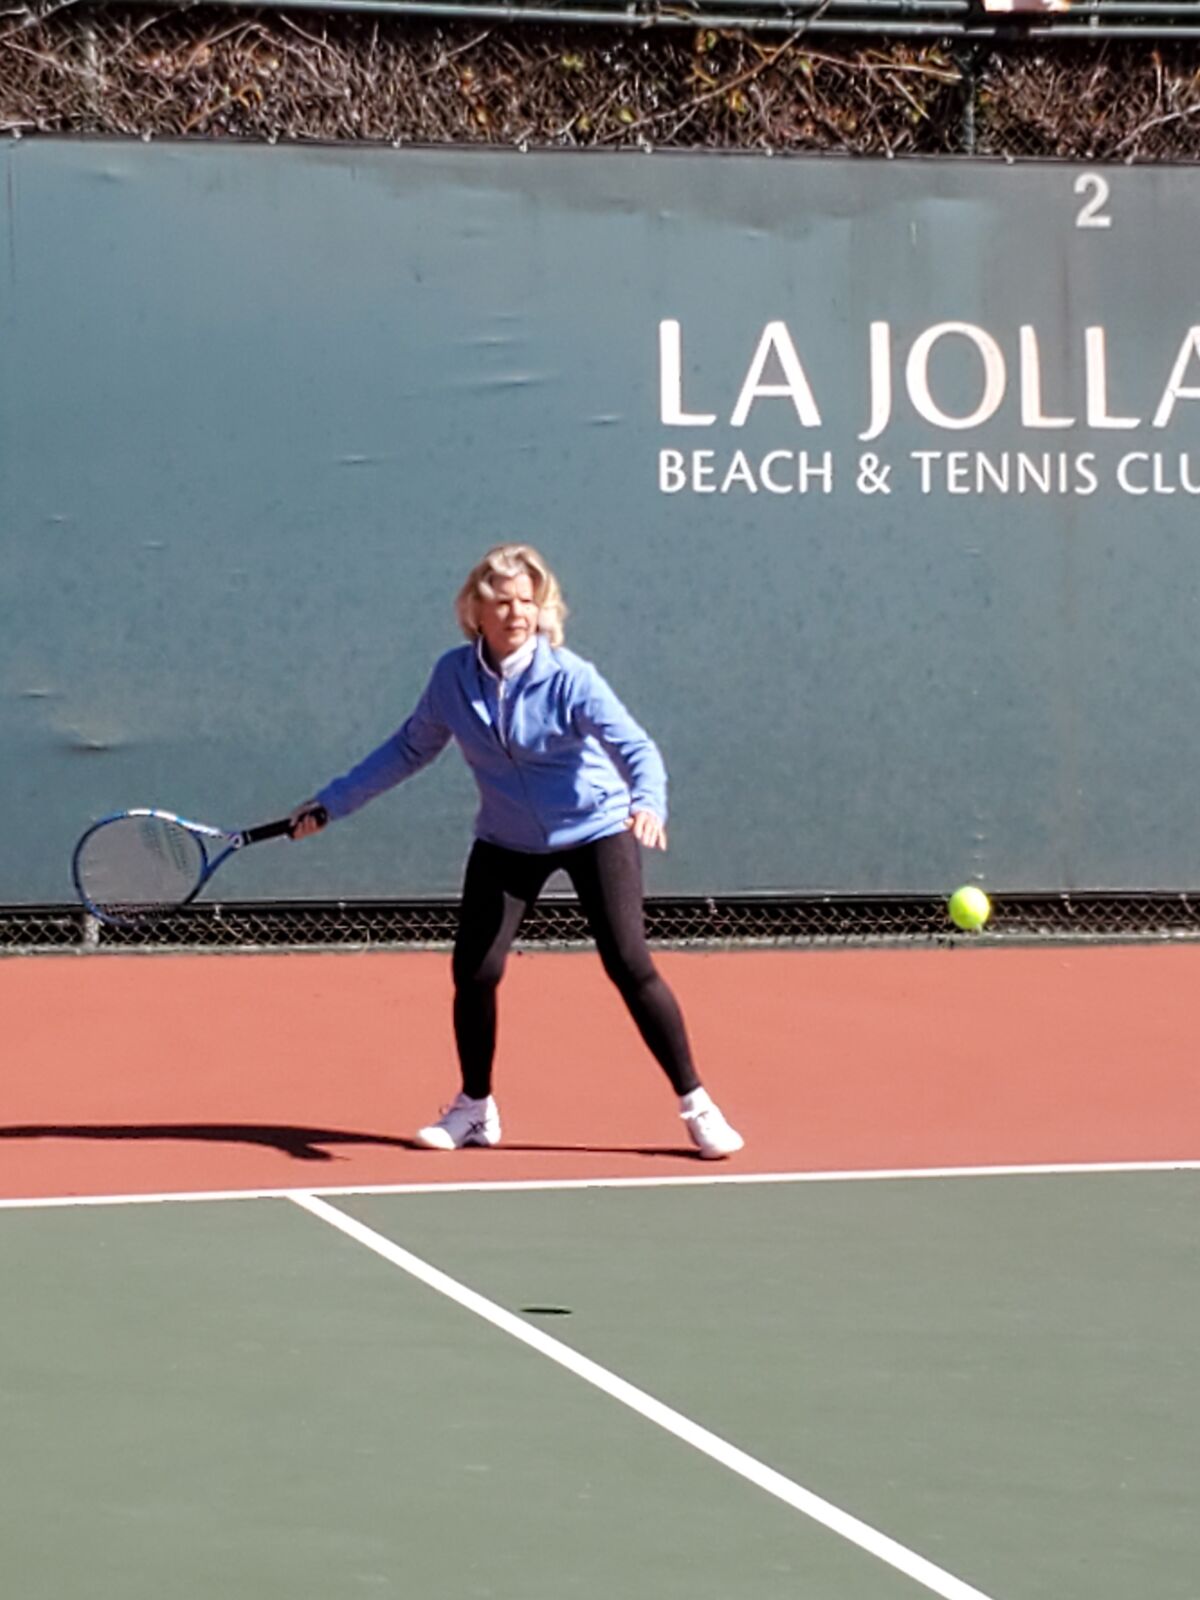 Suella Steel has been a member of the La Jolla Beach & Tennis Club since 1986 and continues to play on Fridays.